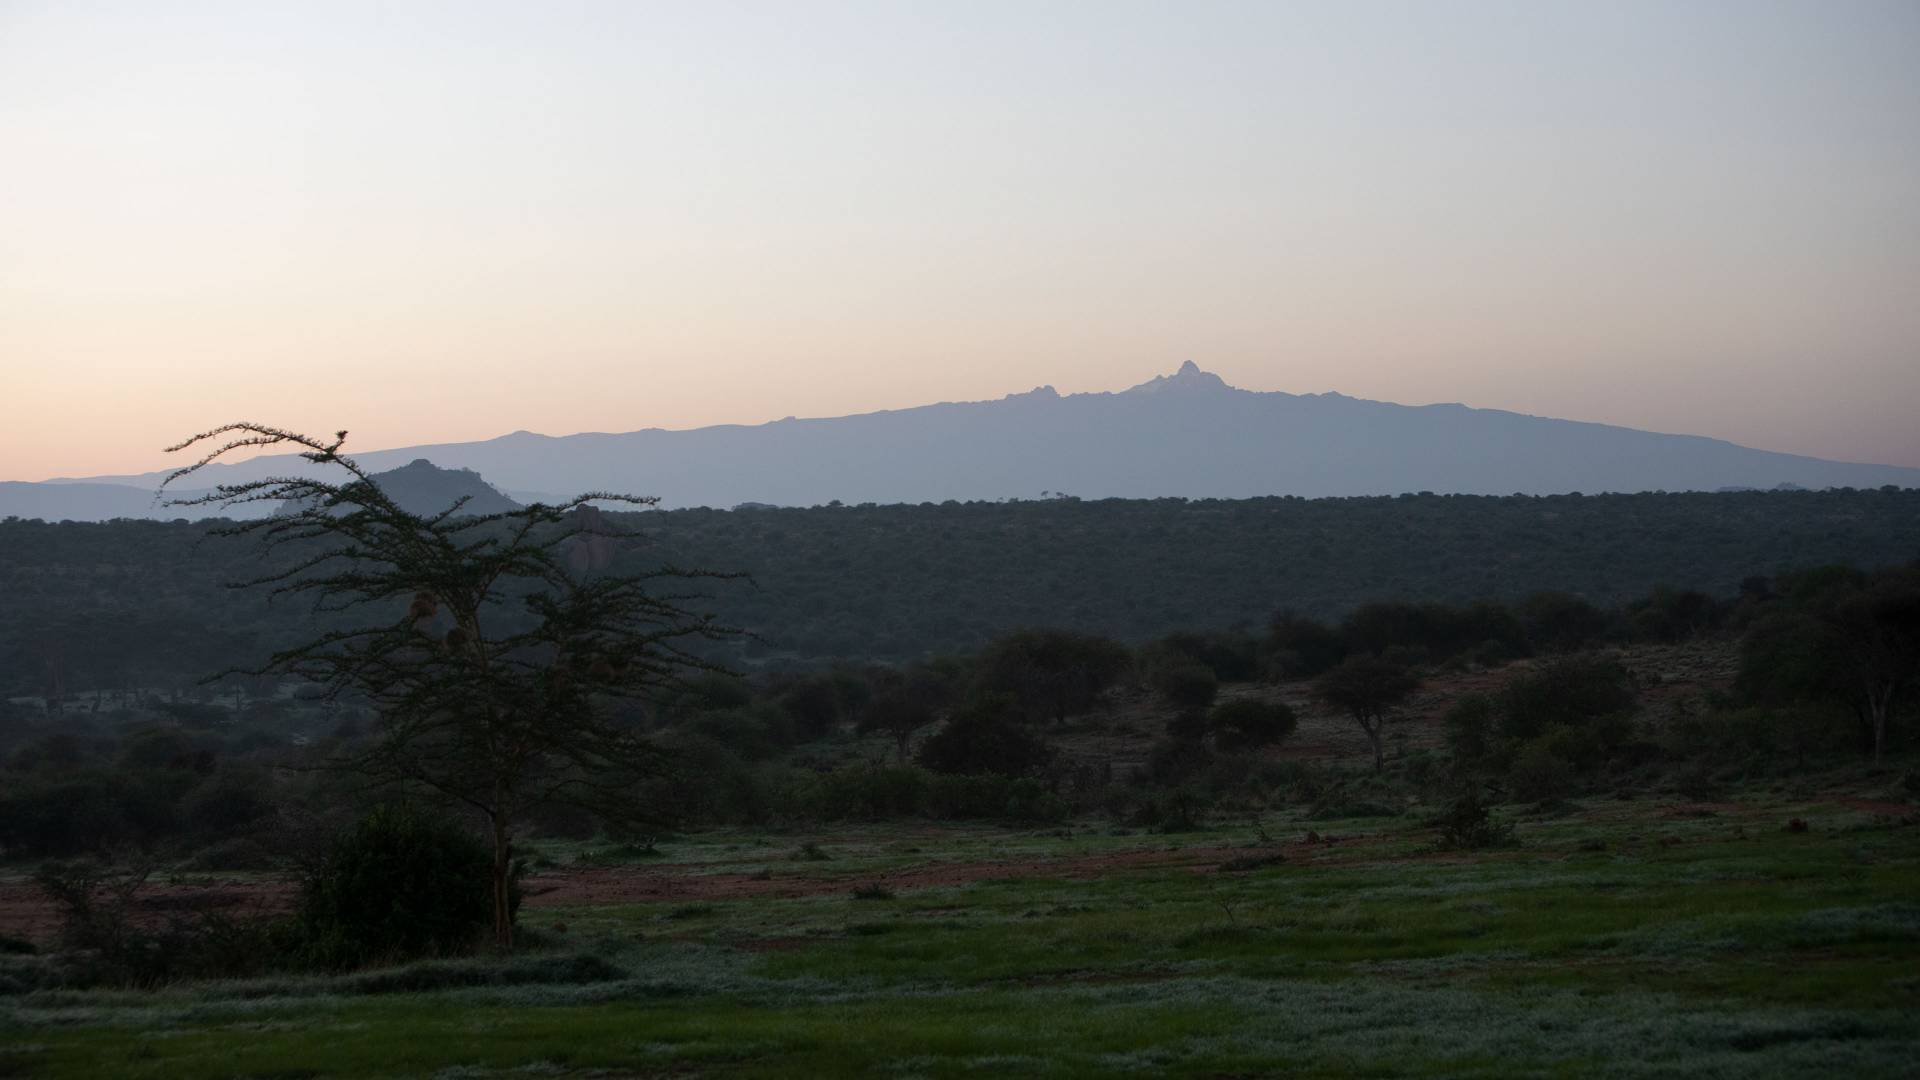 Sunrise with Mt. Mukenya in the distance